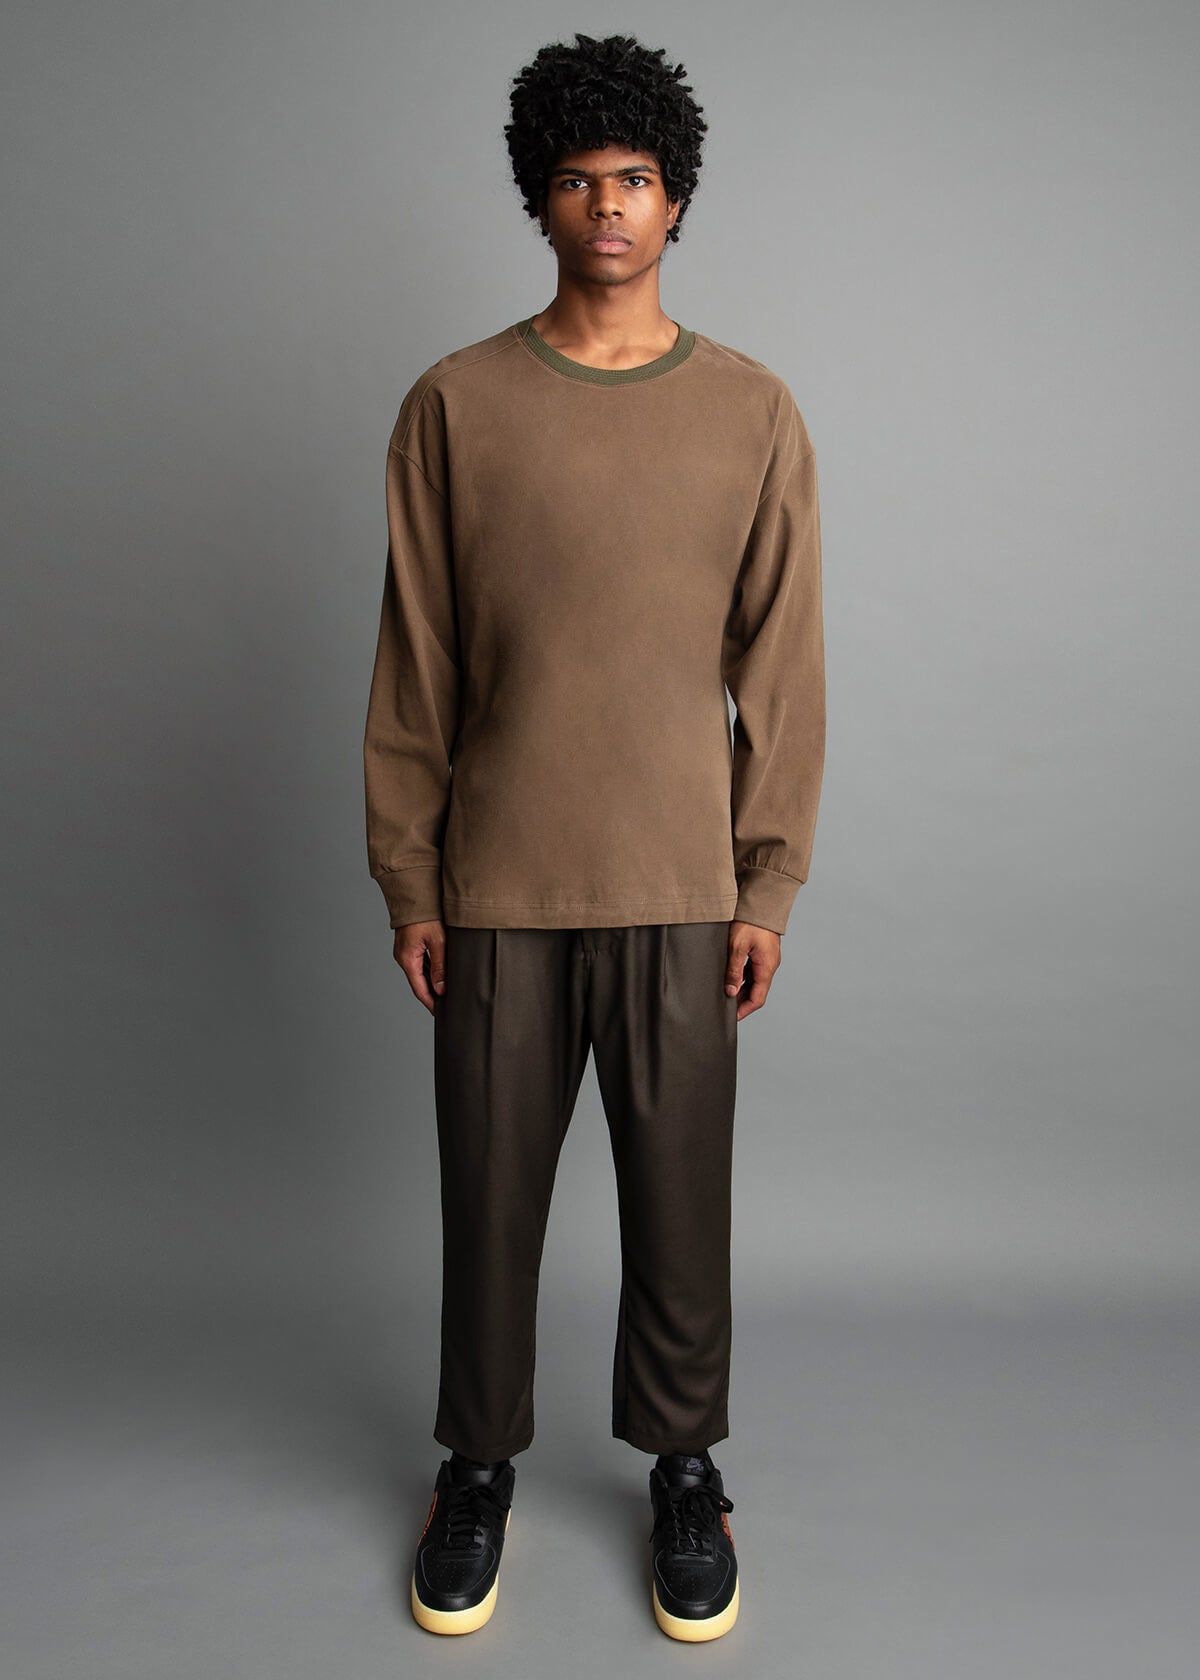 Mercy Long Knit Olive Rlx Fit